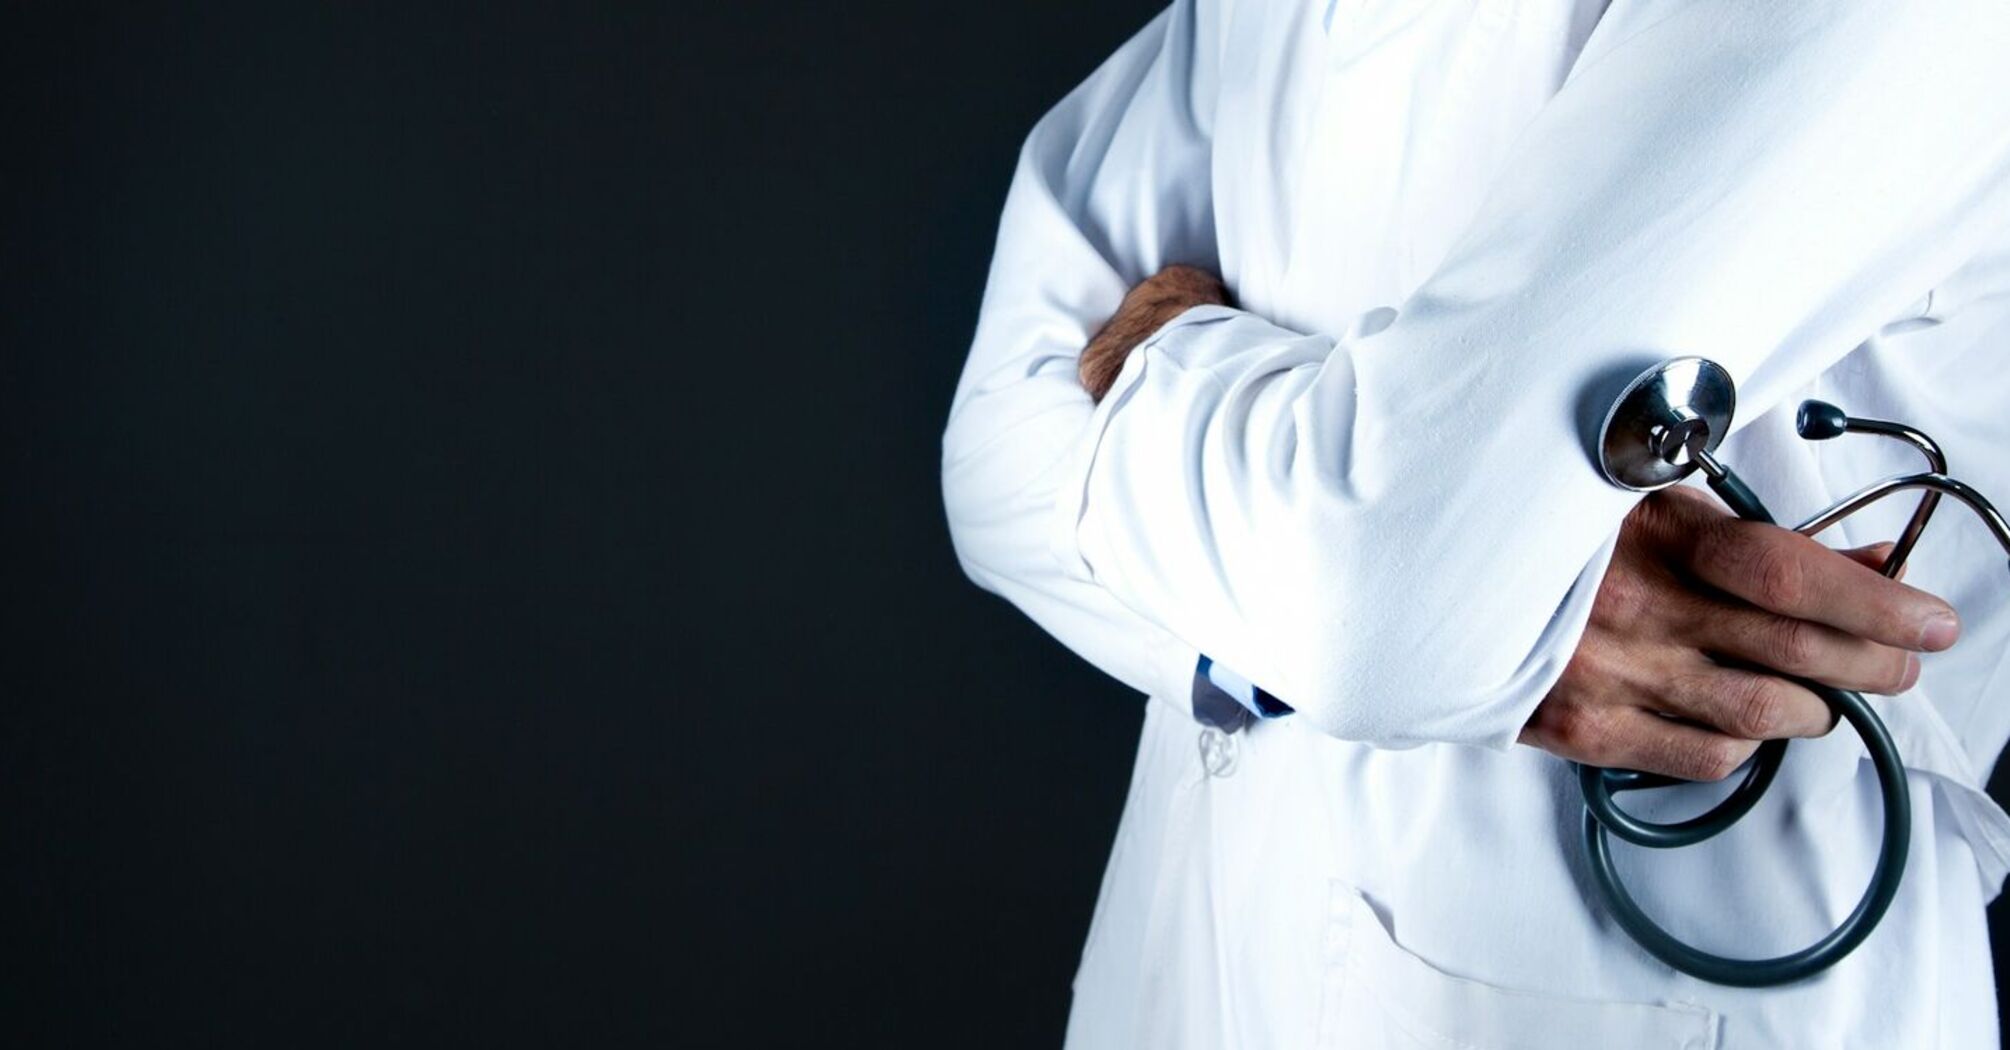 Doctor in a white coat holding a stethoscope